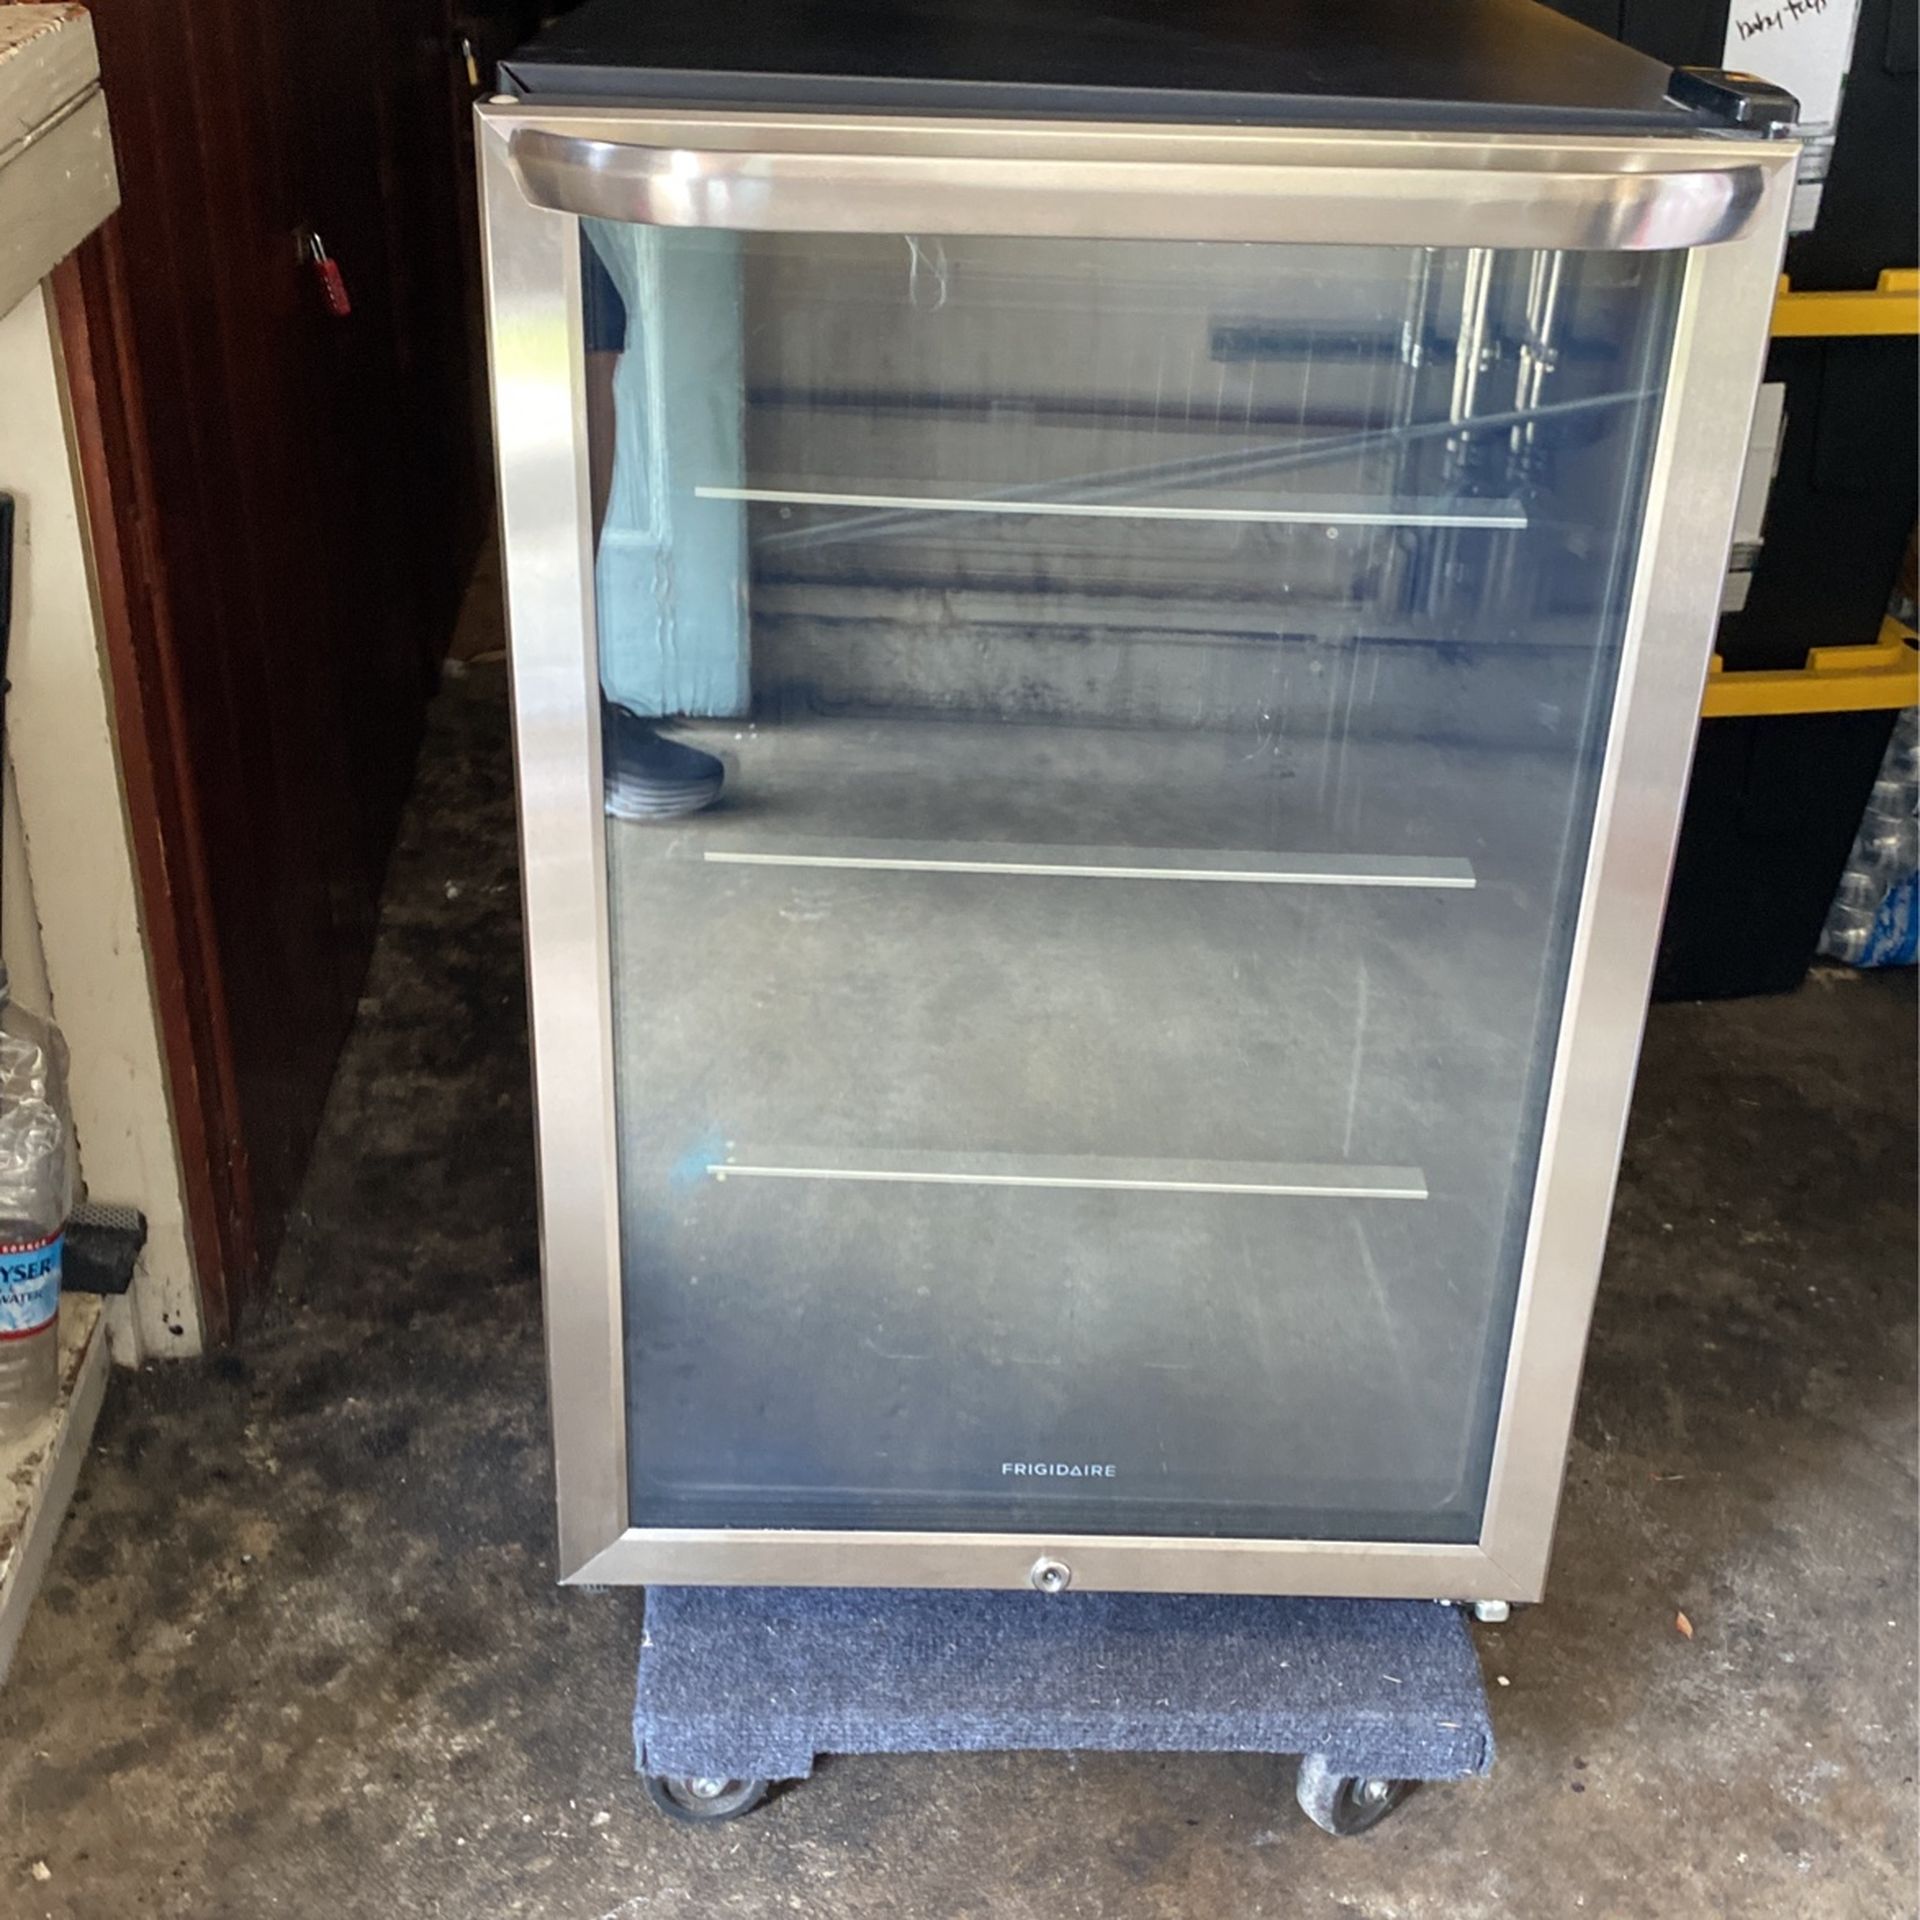 Frigidaire Mini Fridge 138 Can 4.6 Cubic Foot 34 Inch Height 22 Inch Width Stainless Steel Thick Glass Shelf’s Inside The Inside Is Brand New Paid 400